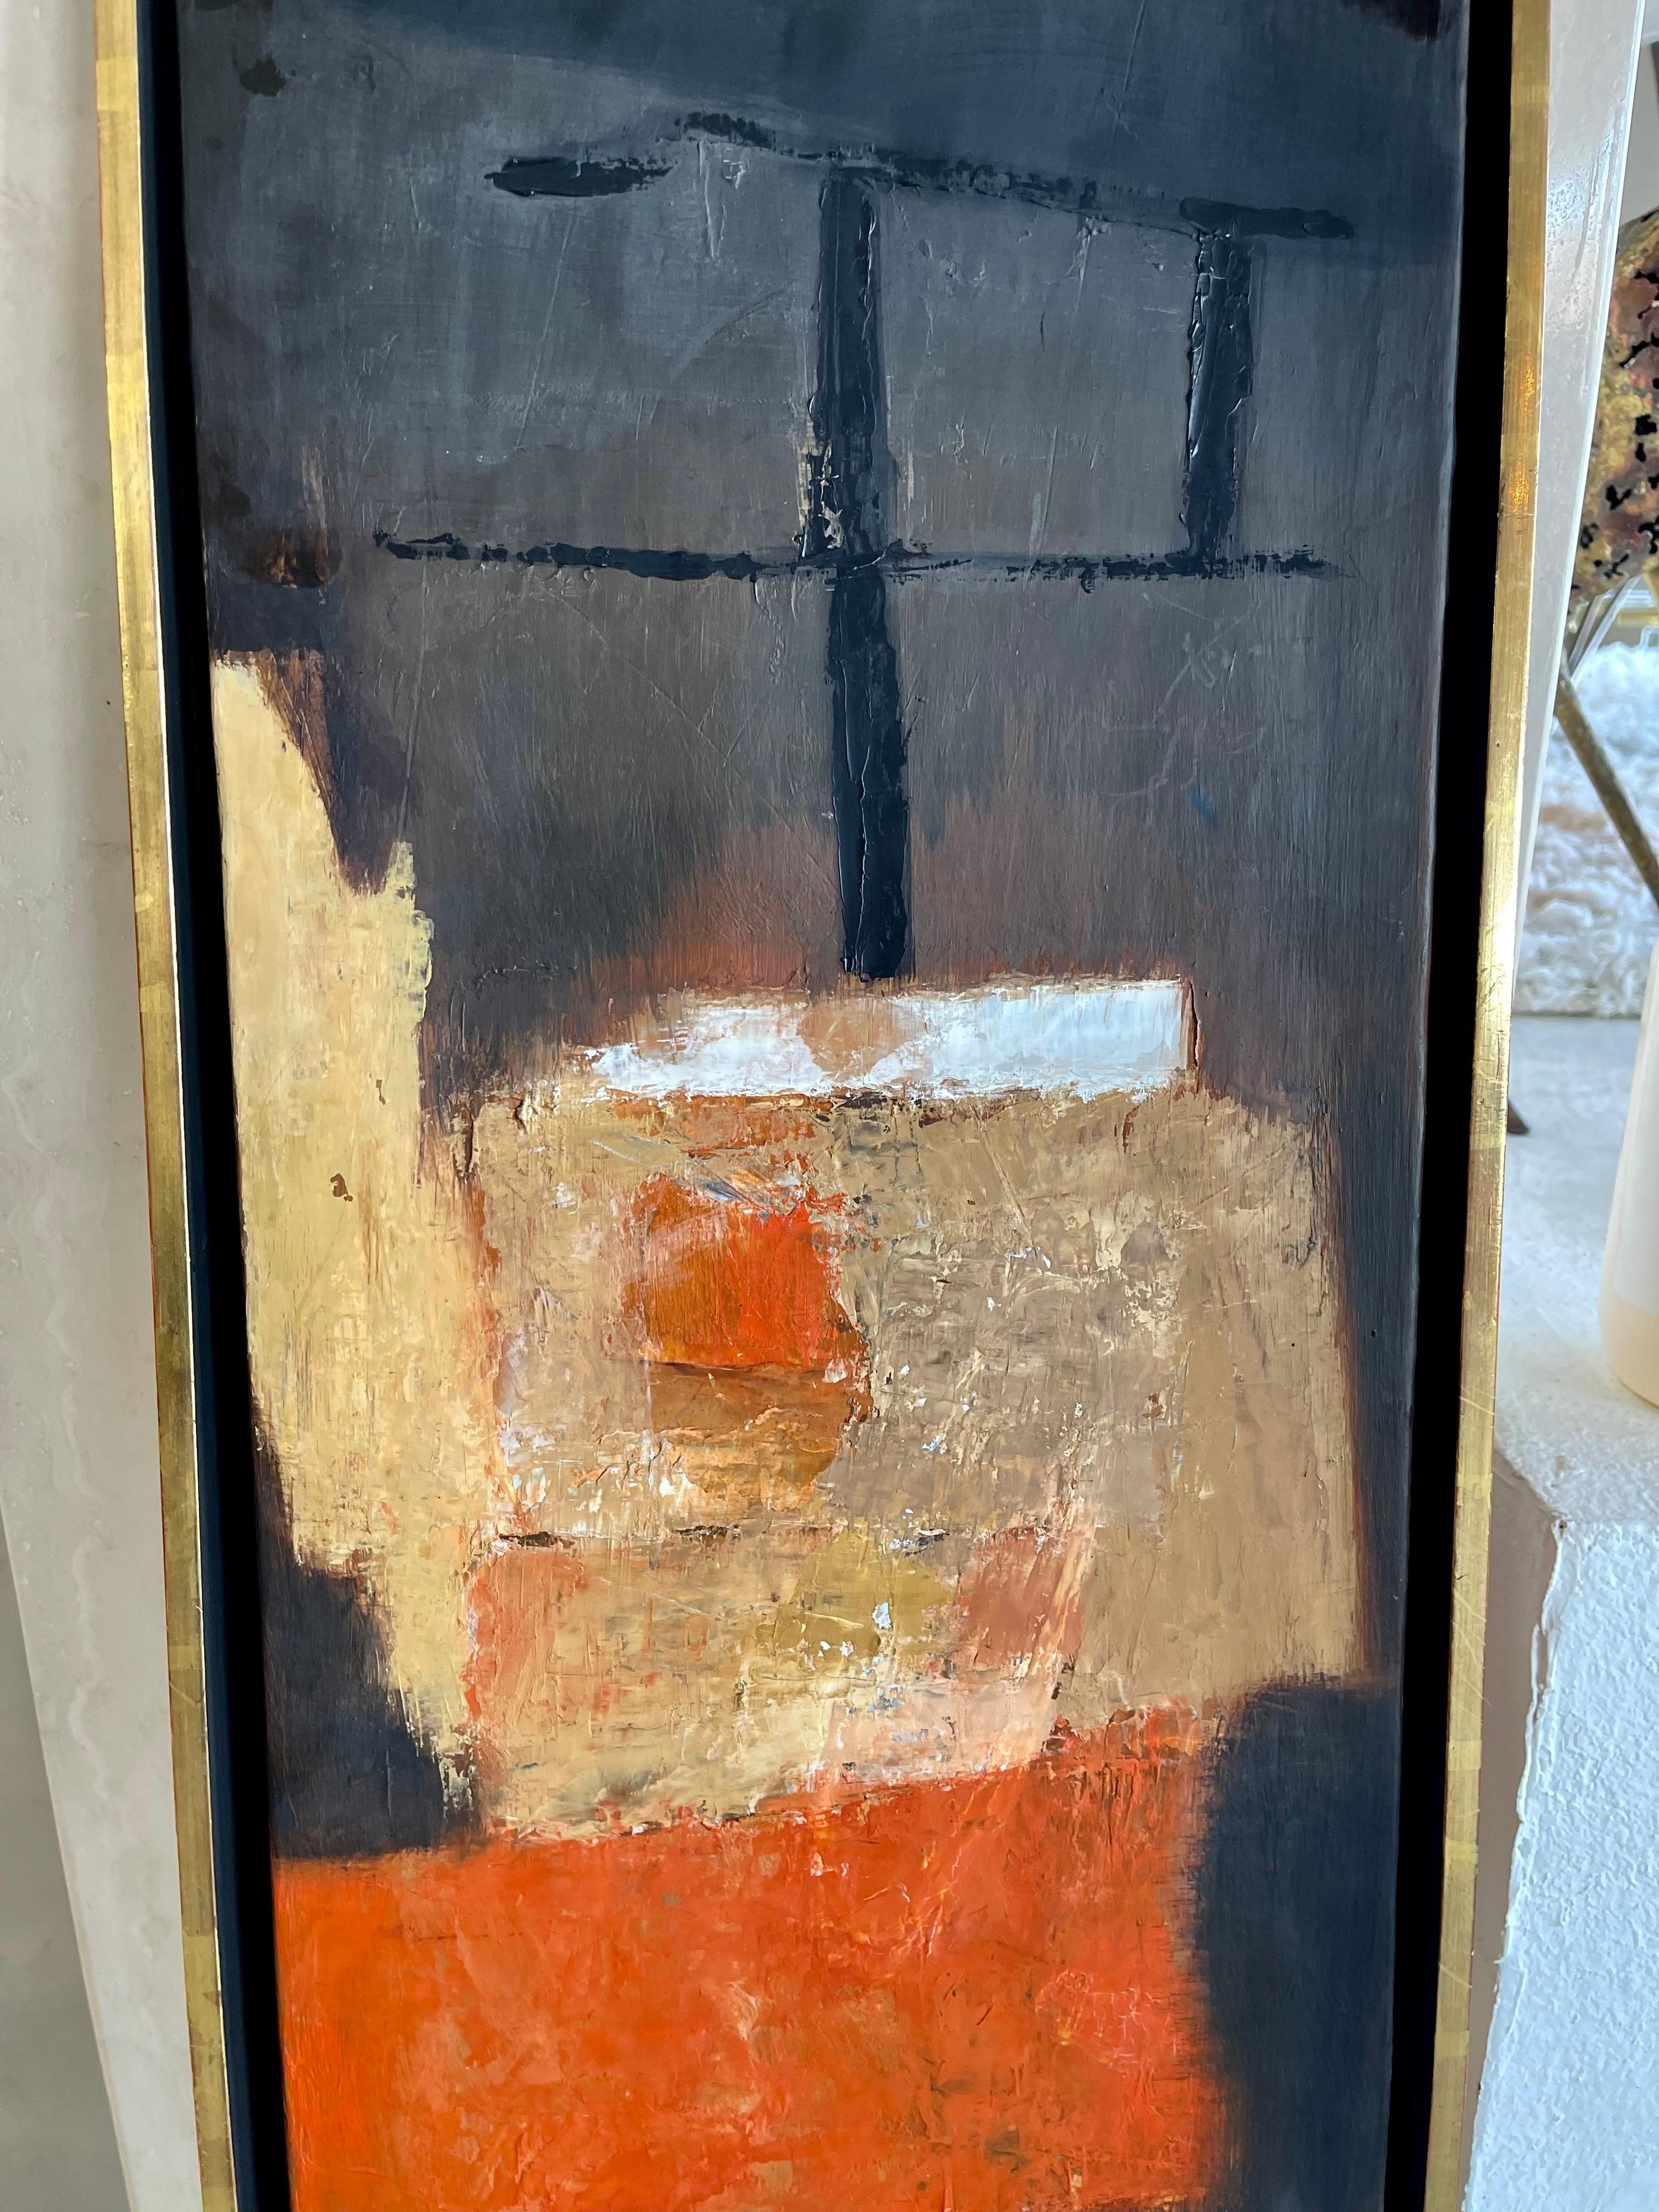 A wonderful abstract by Francis Field Monogrammed and dated 1958. In a period frame with a Stuttman Gallery paper label on the back. Nice composition. Painting is on wood panel. The frame has a gilt edge with some rub marks and spots of touch up.